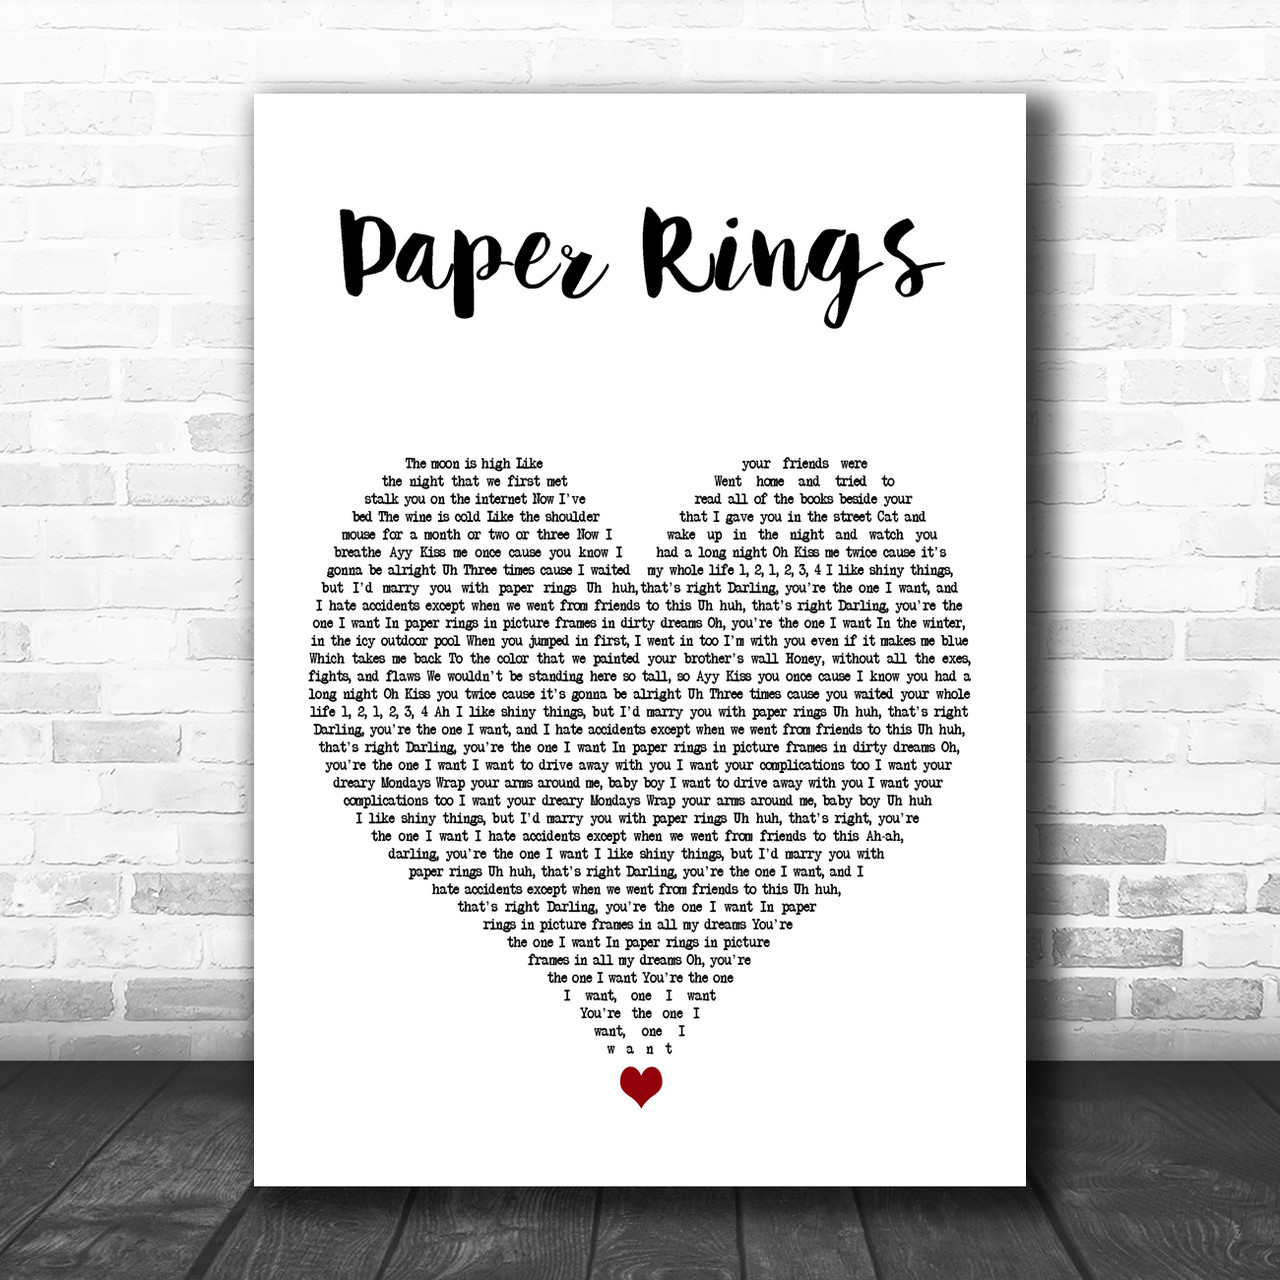 Taylor Swift - Paper Rings (Lyrics) I like shiny things, but I'd marry you  with paper rings - YouTube